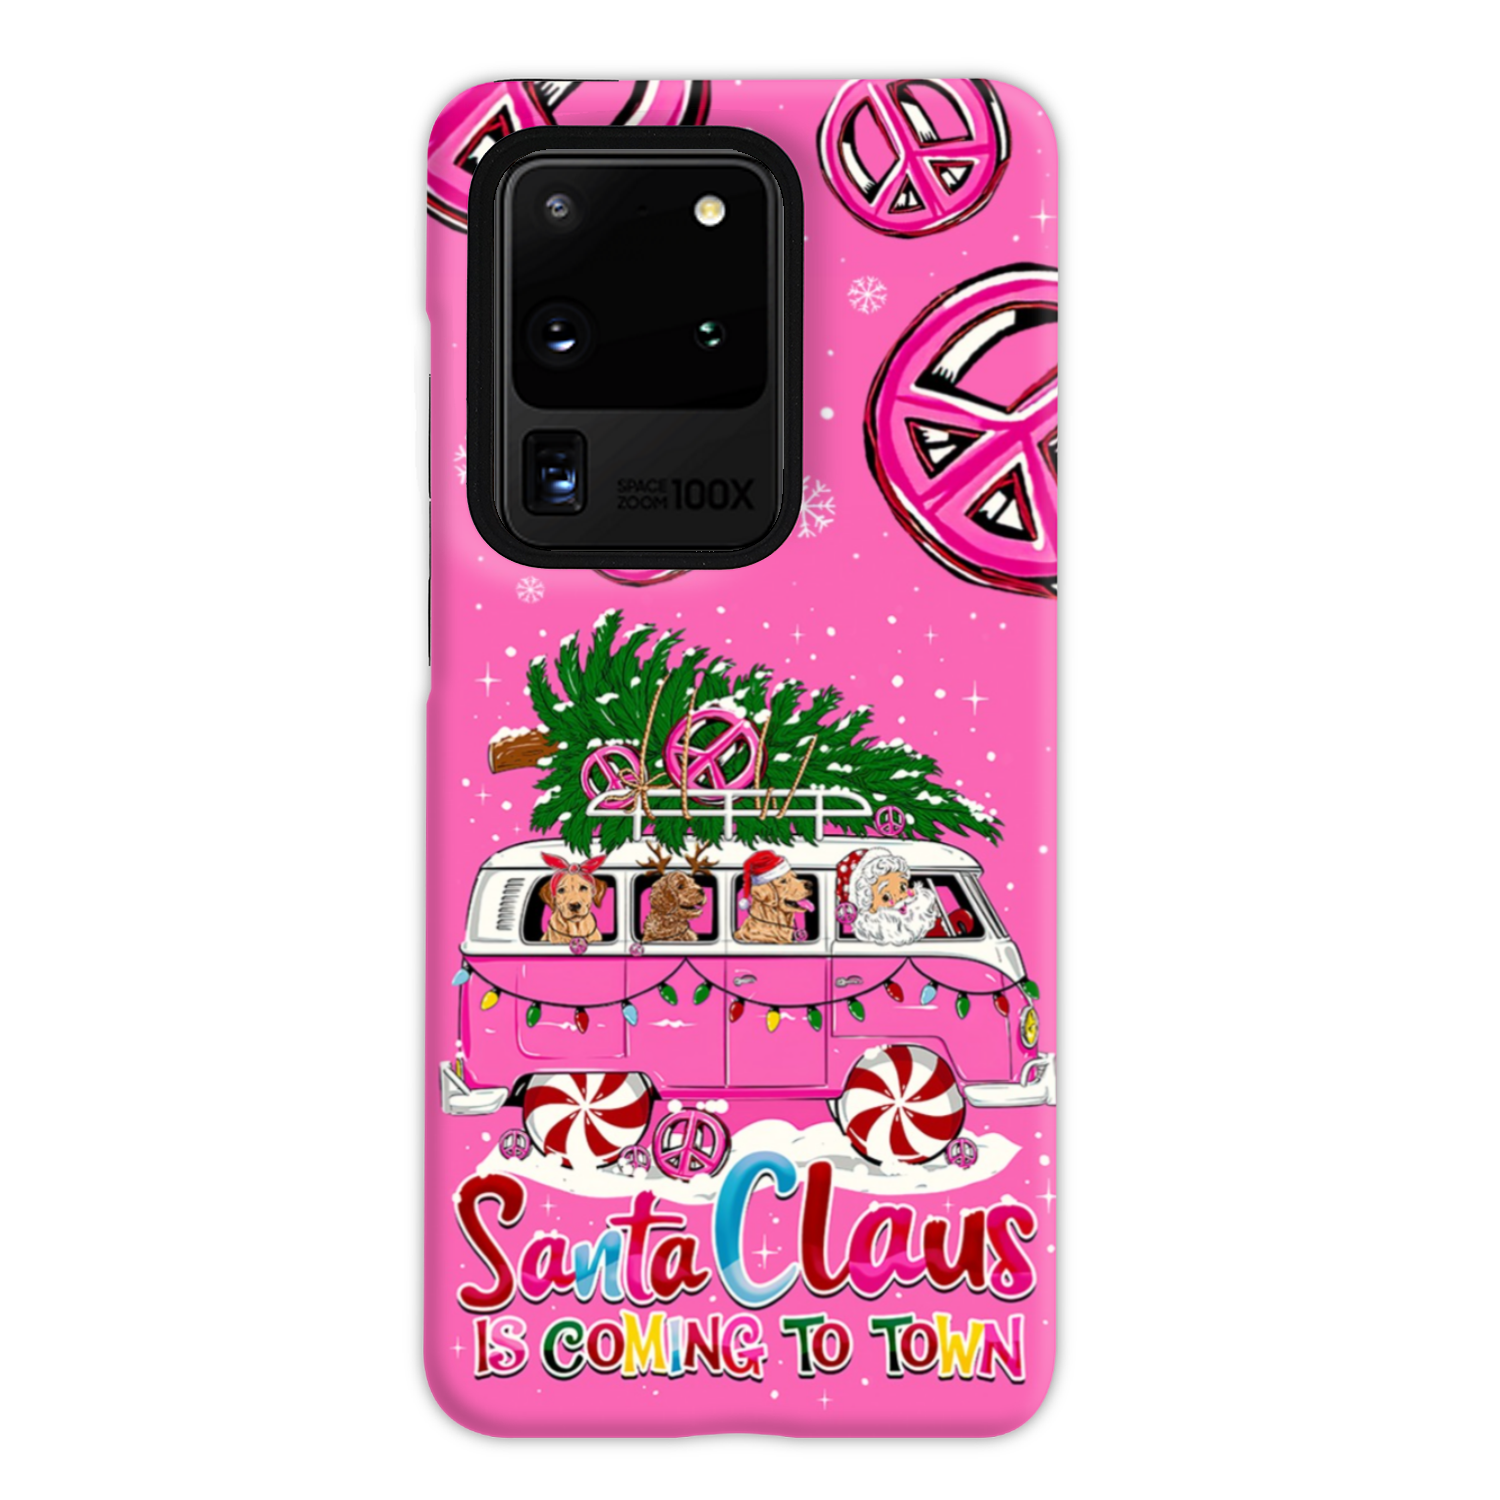 SANTA CLAUS IS COMING CHRISTMAS PHONE CASE - TY2310232